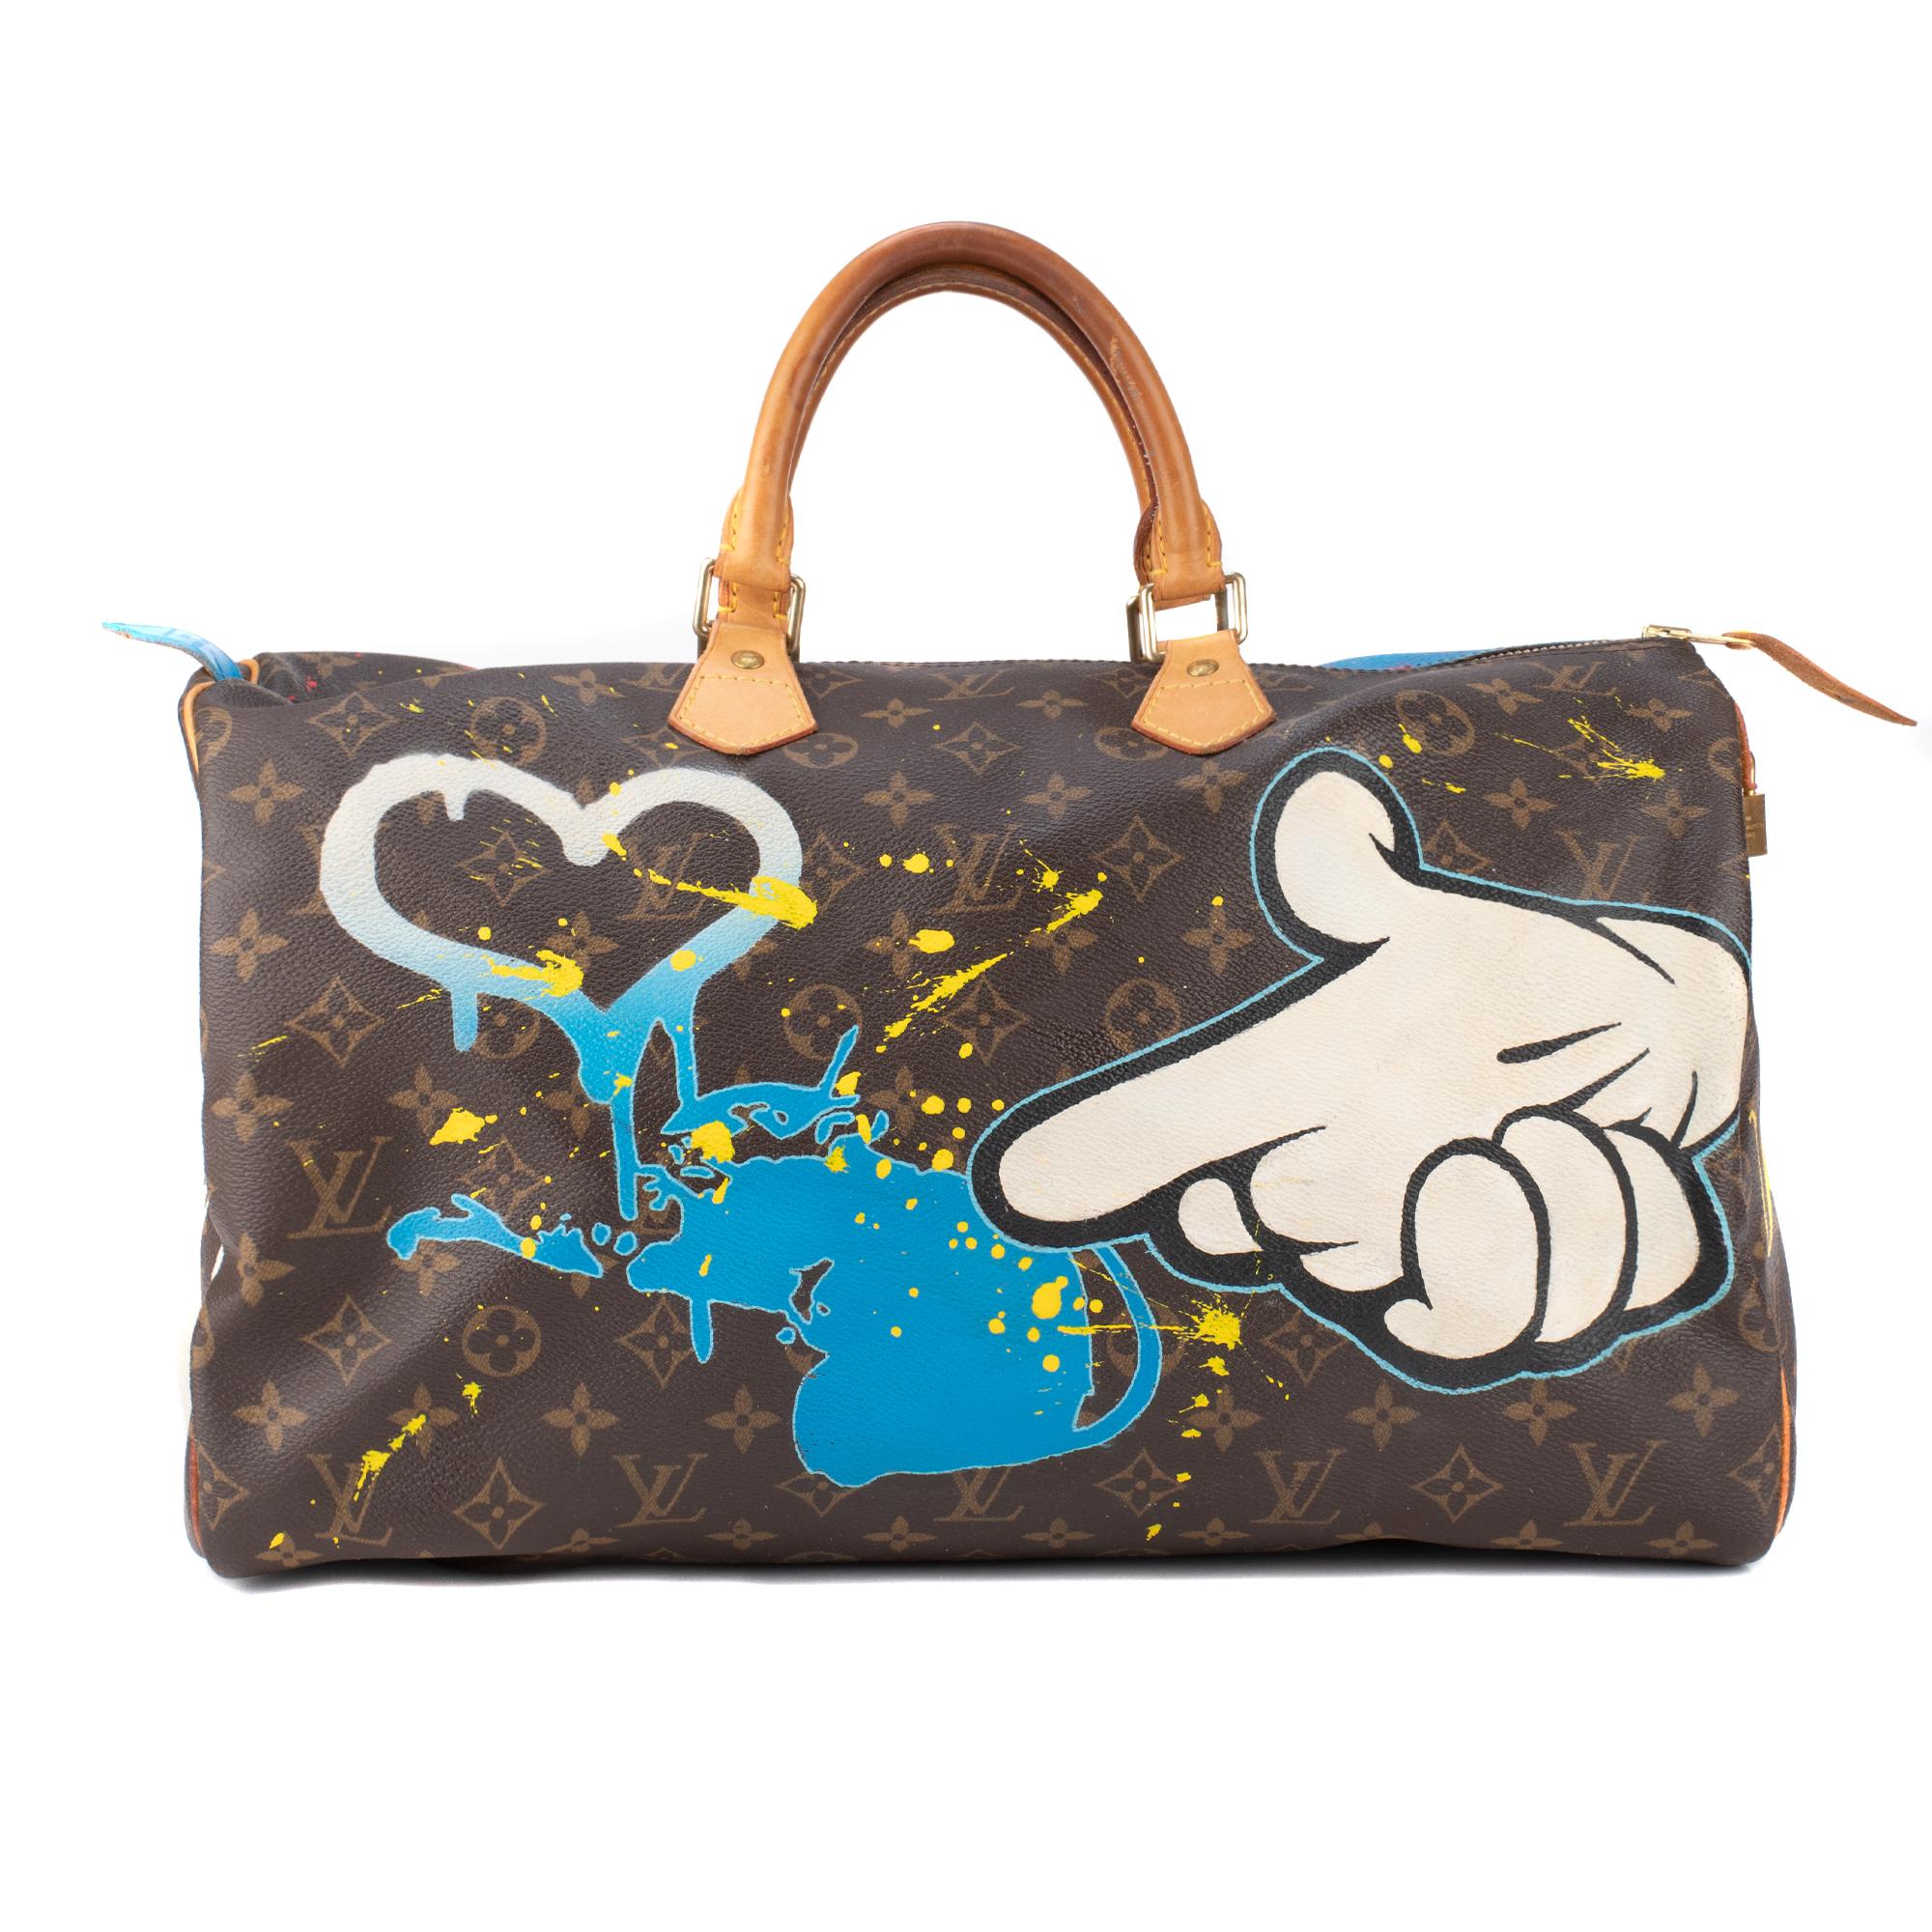 Superb handbag Louis Vuitton Speedy 40 cm in monogram canvas coated brown and natural leather, gold metal trim, double handle in natural leather allowing a handheld.
This article was personalized by the trendy artist in Street Art Patbo on the theme